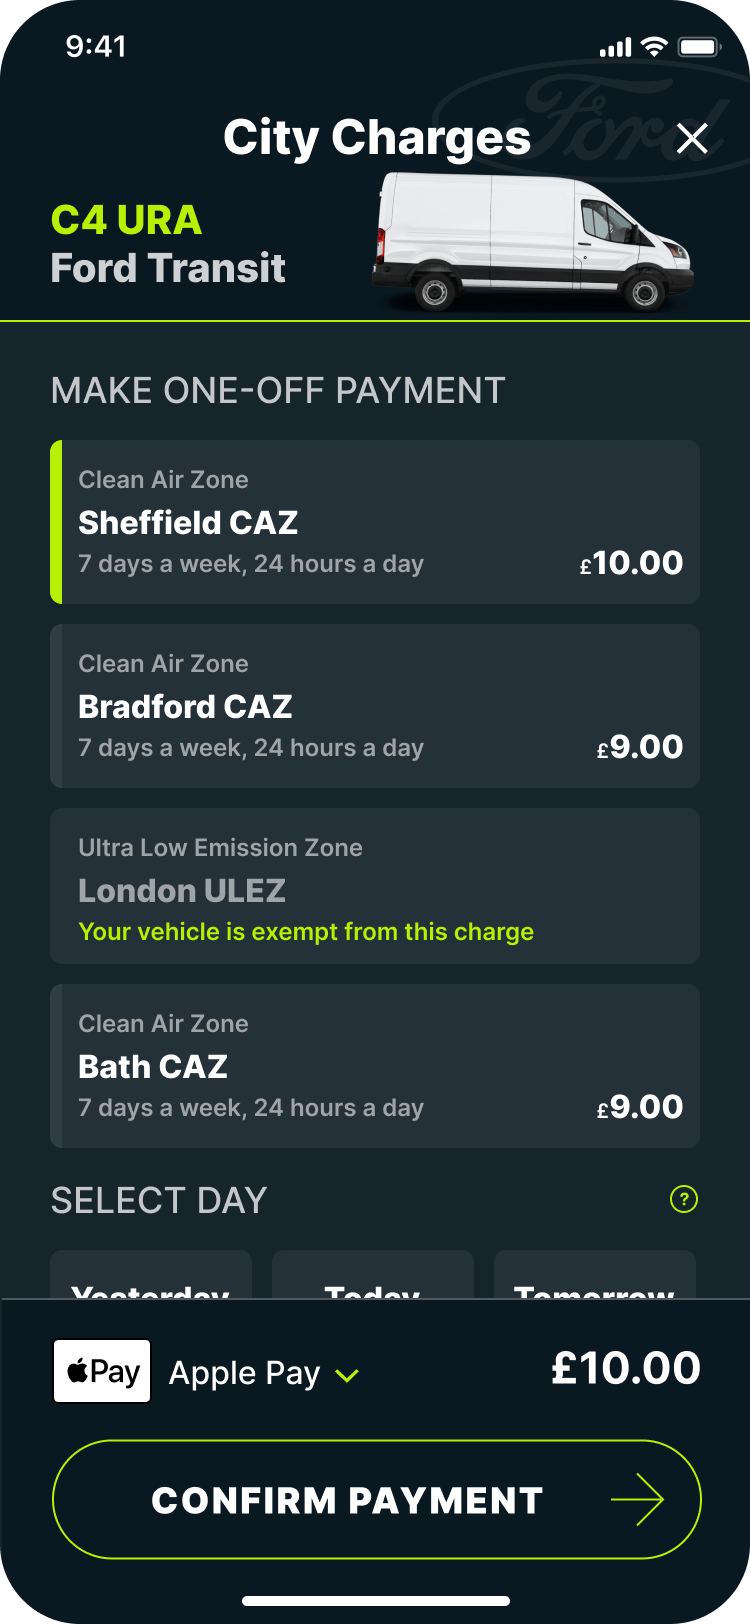 'City Charges' screen in the Caura app showing the Sheffield Clean Air Zone charge